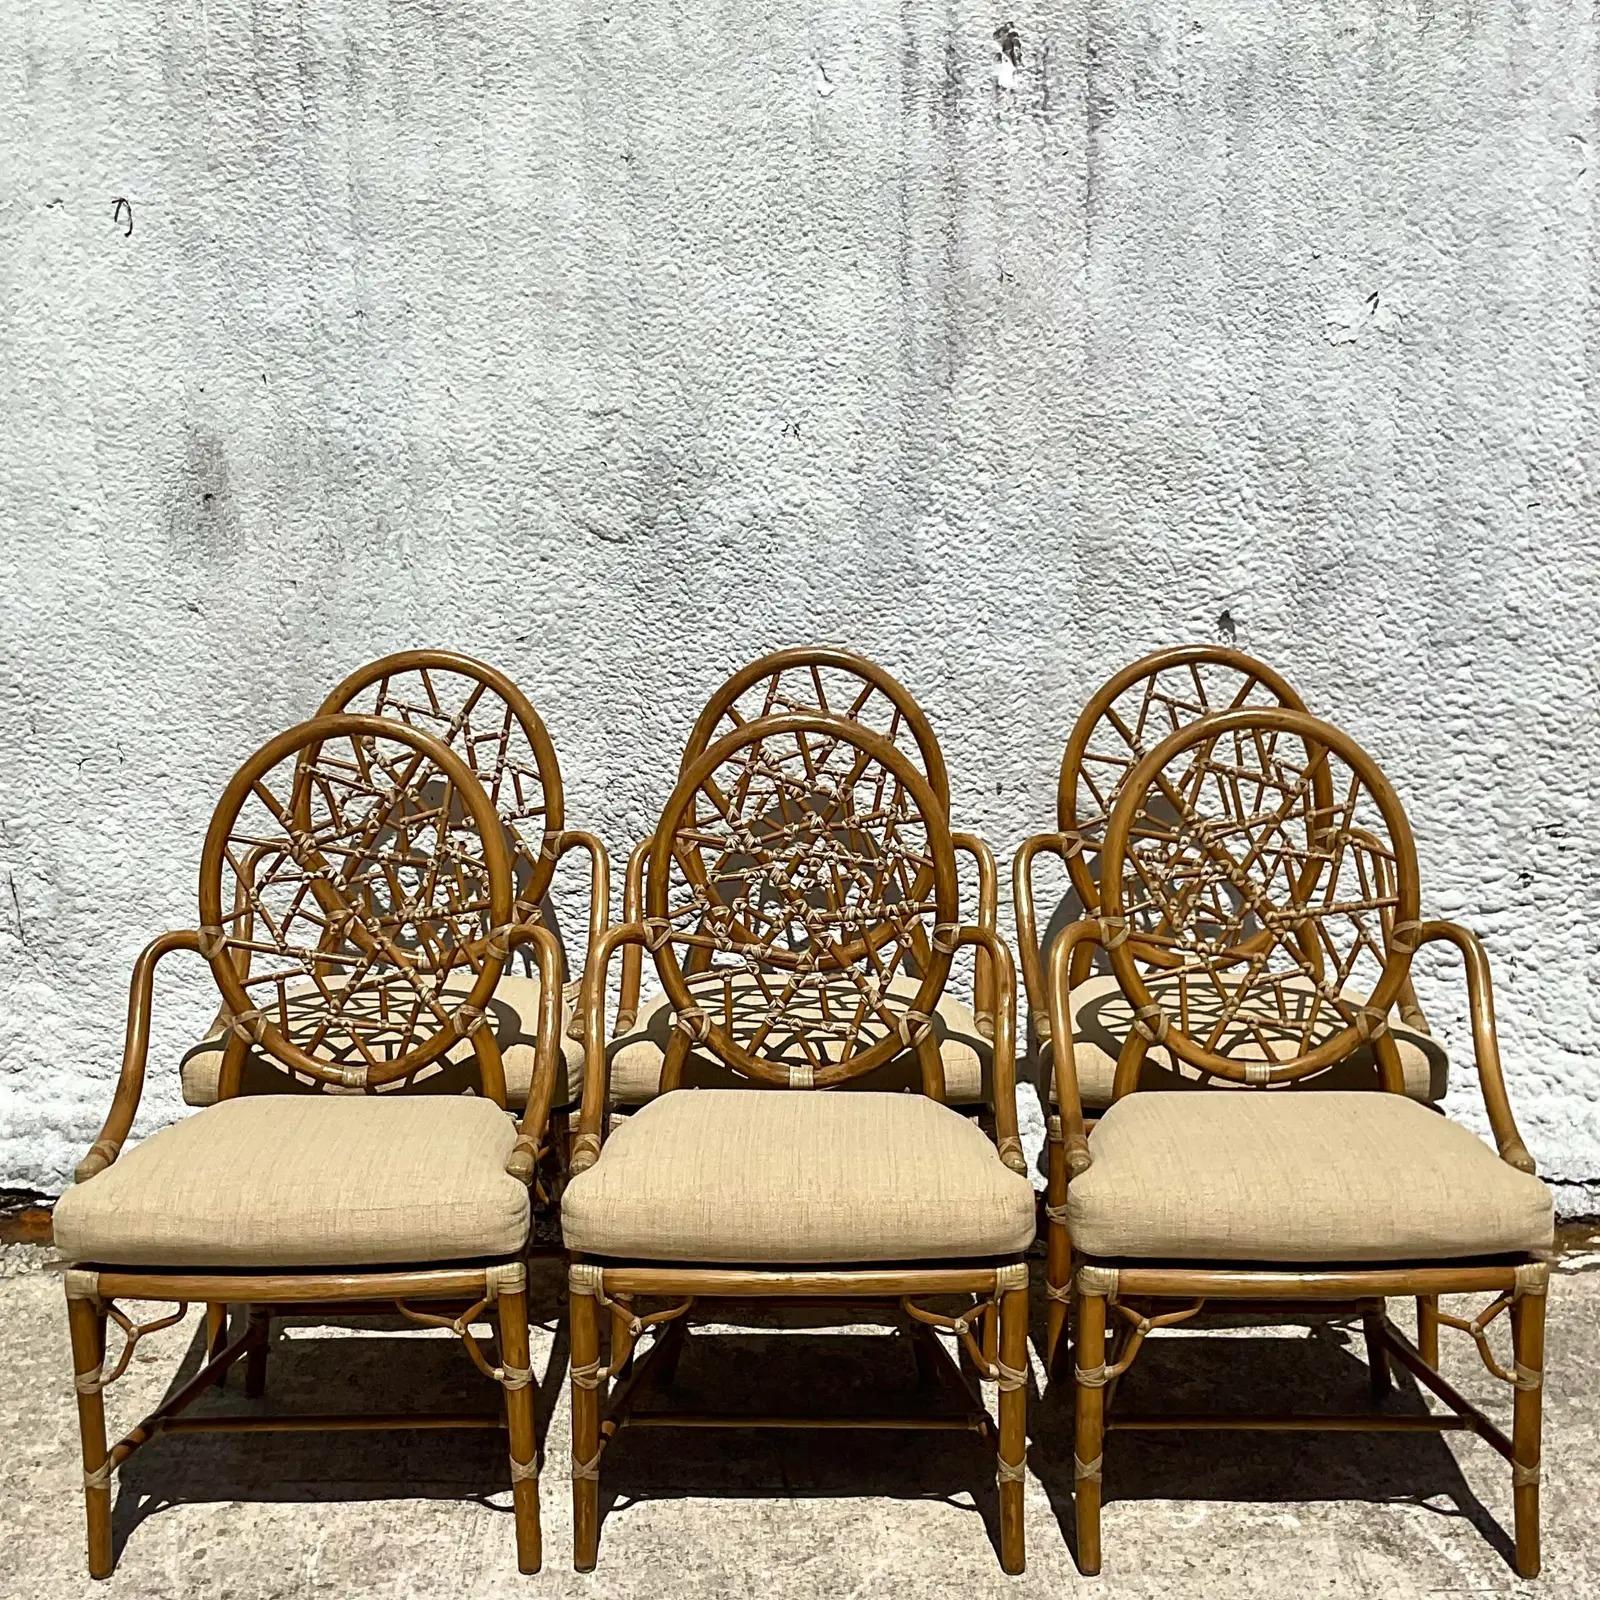 Spectacular set of 6 vintage Coastal dining chairs. The coveted “Cracked Ice” design made by the iconic McGuire Group. Beautiful bent rattan chair with inset cane seats. Custom cushions with all logo tags in tact. In pristine condition. Acquired